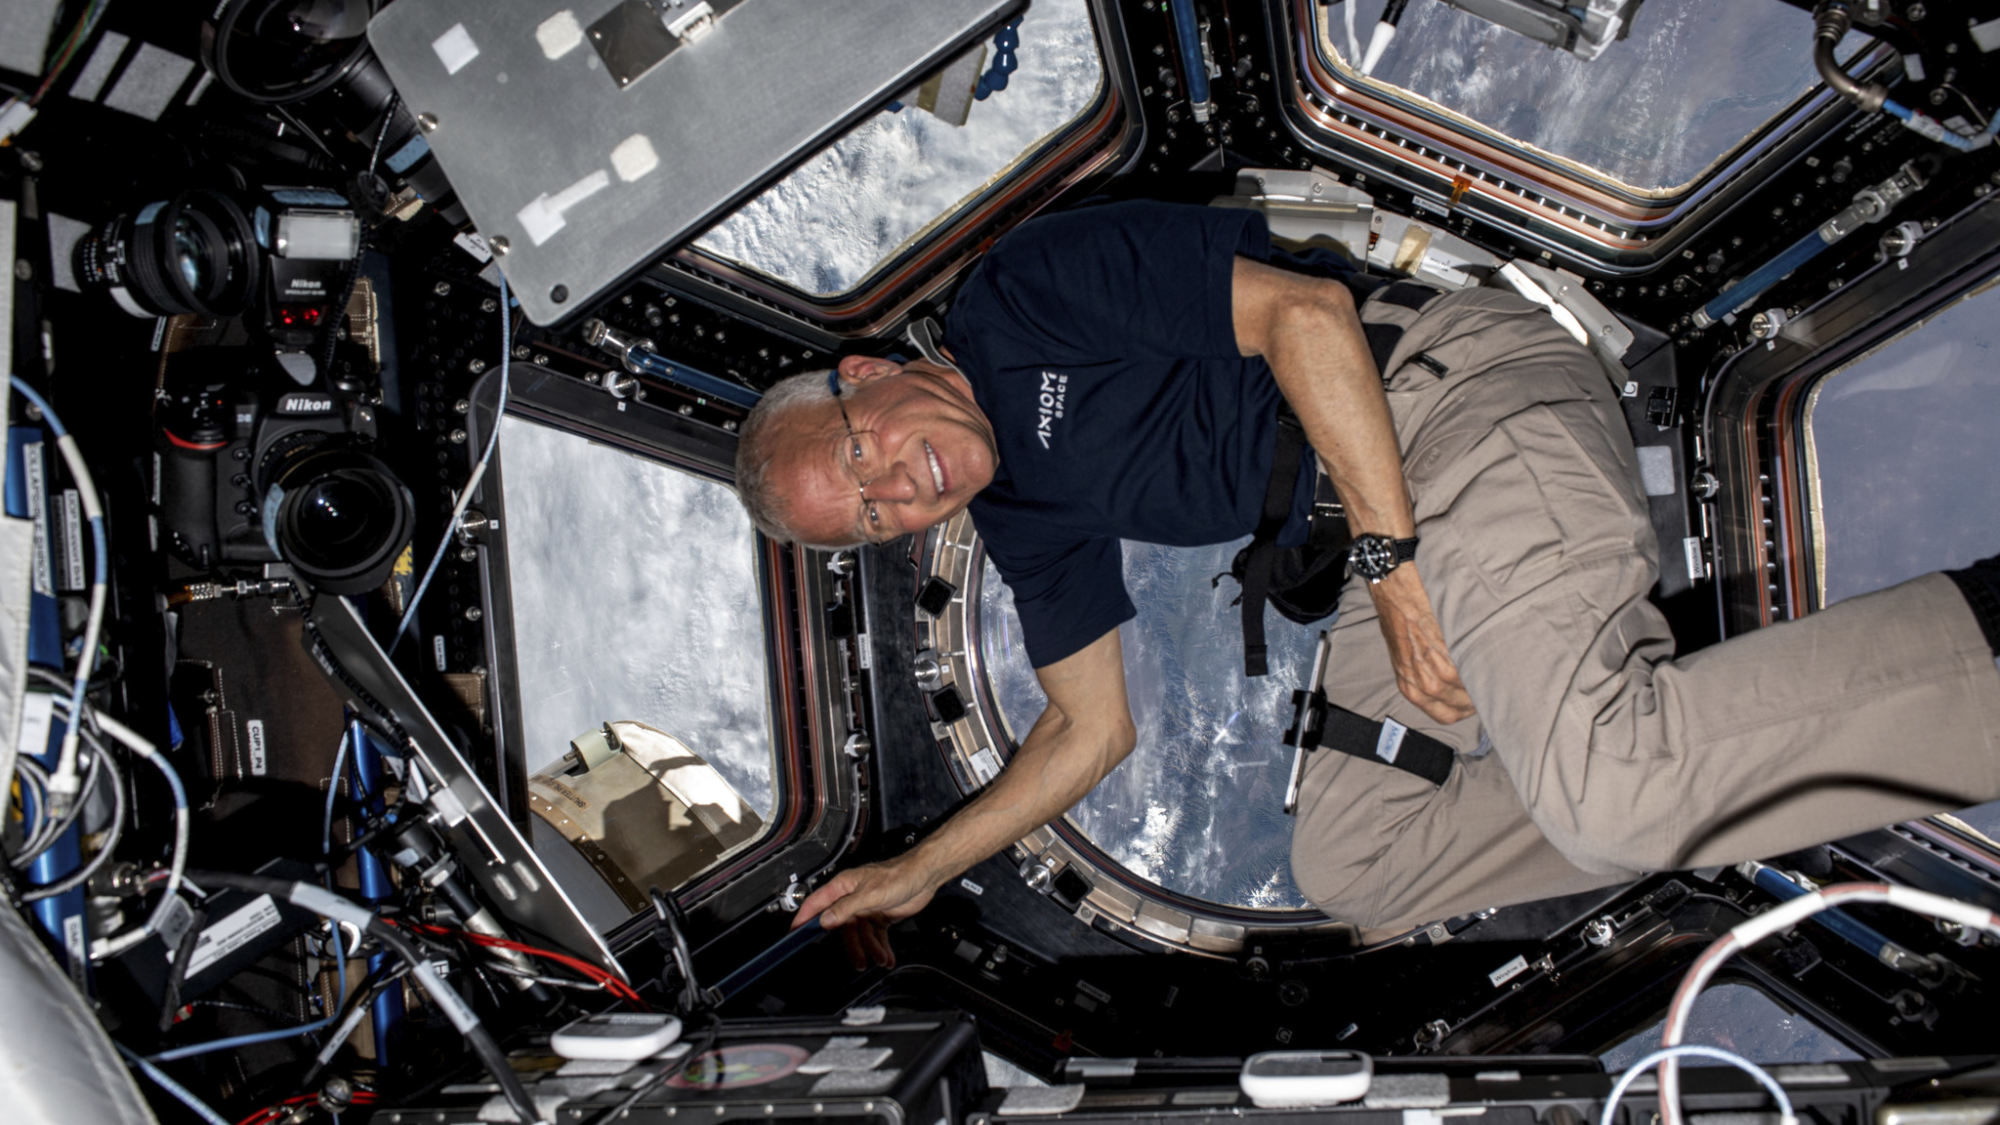 Ax-2 pilot John Shoffner floating in weightlessness with Earth behind in the window.